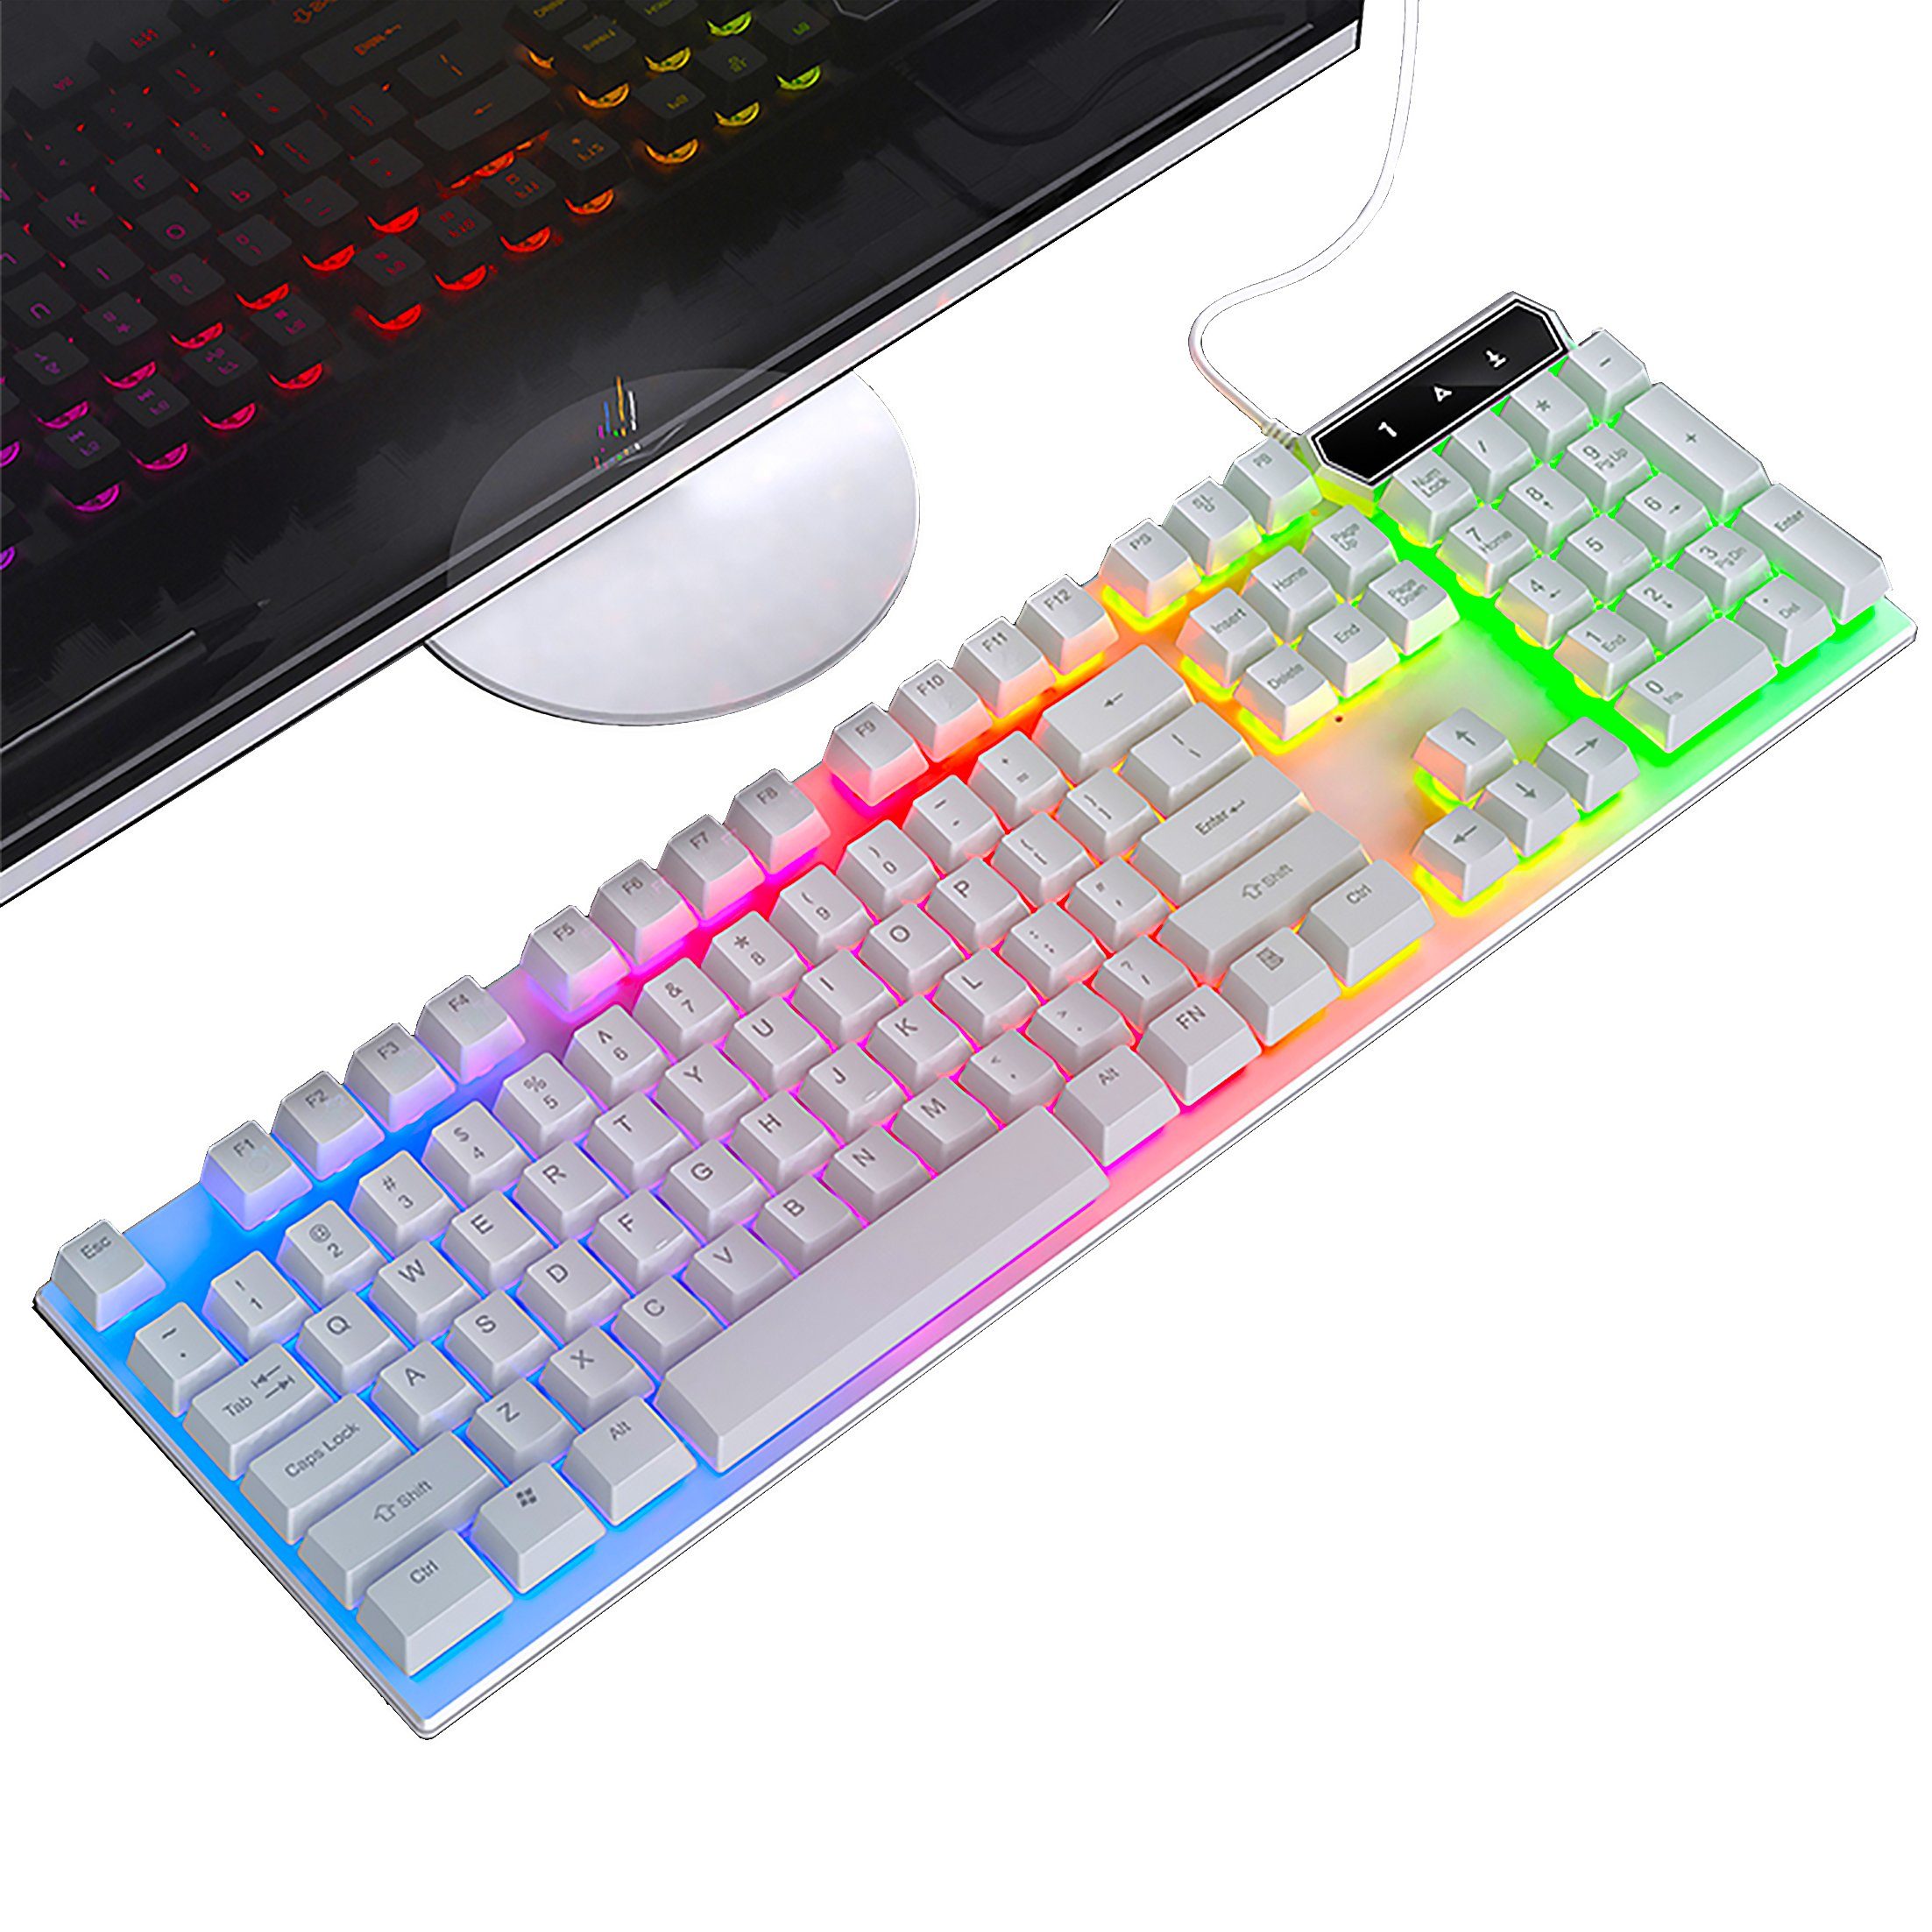 Mechanical Gaming Keyboards&comma; Competition Keyboards&comma; PC Keyboards Gaming Keyboard &lpar;Wired Keyboard with LED Light for Gamers&sol;Workers 104 Keys&rpar;